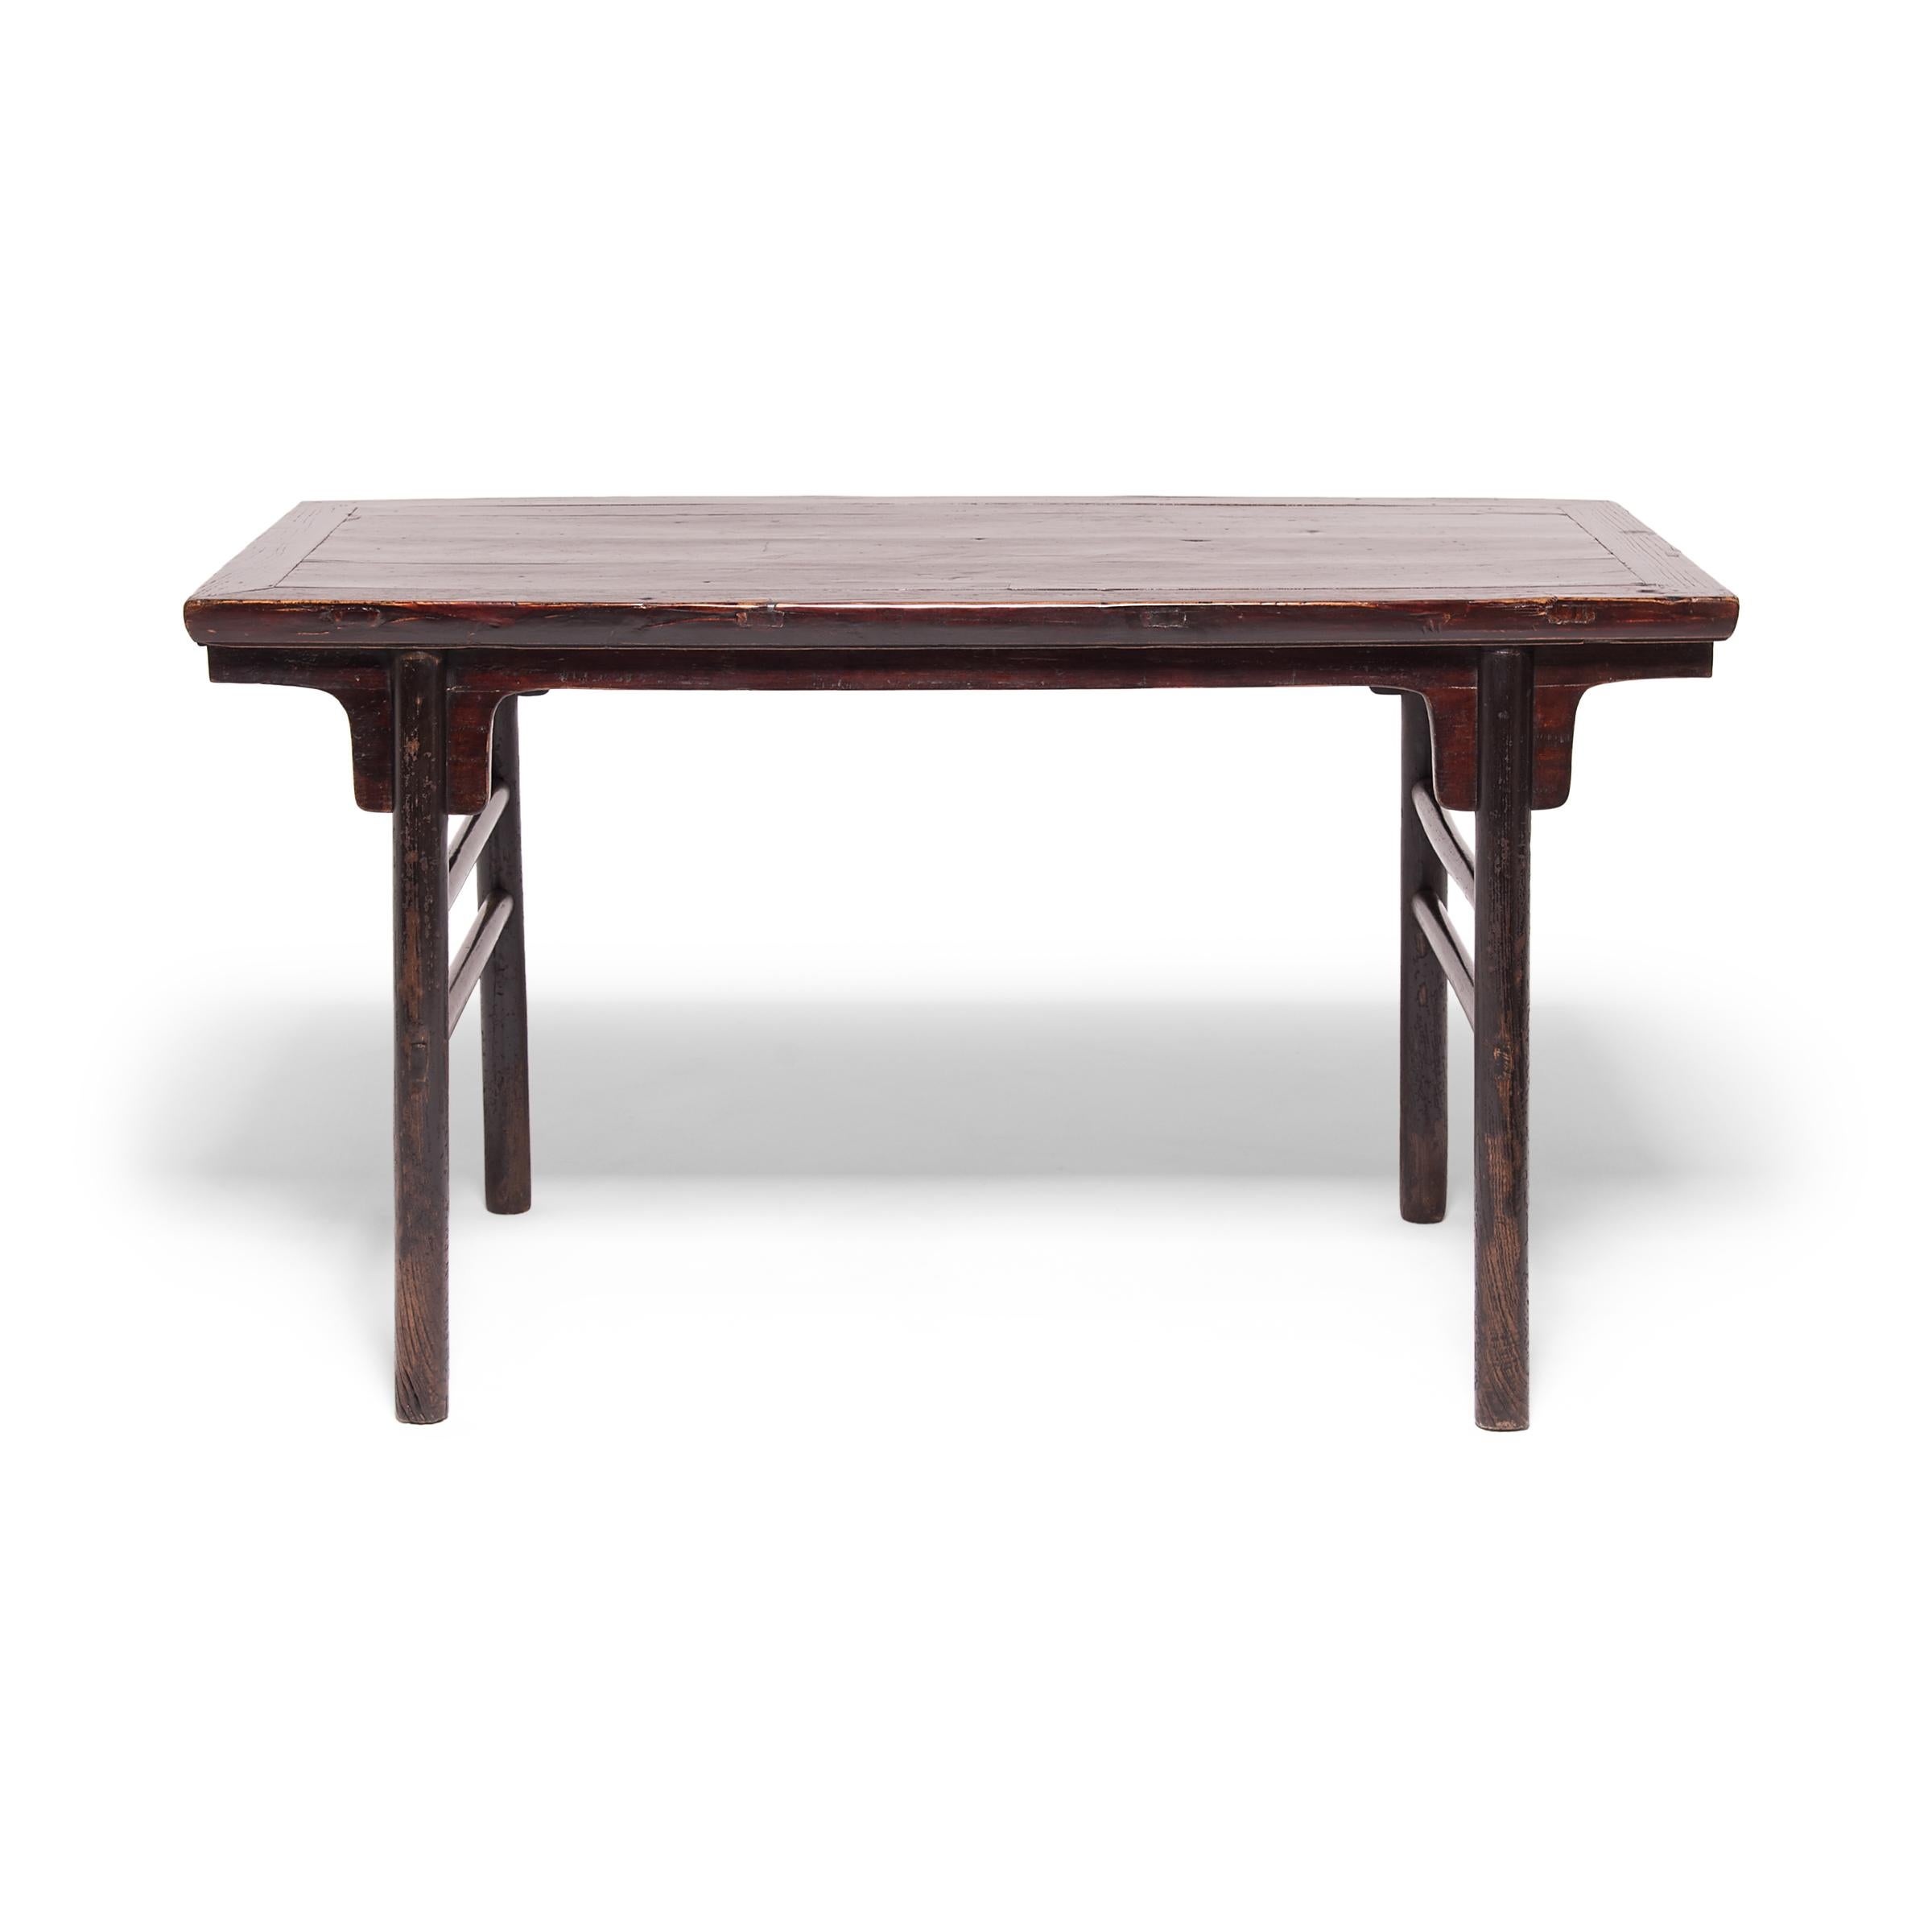 This calligraphy table, like all the highest quality pieces of Chinese furniture, follows the timeless principles of Chinese architectural design and construction techniques. It has bold strong lines, limited ornamentation, and simple double